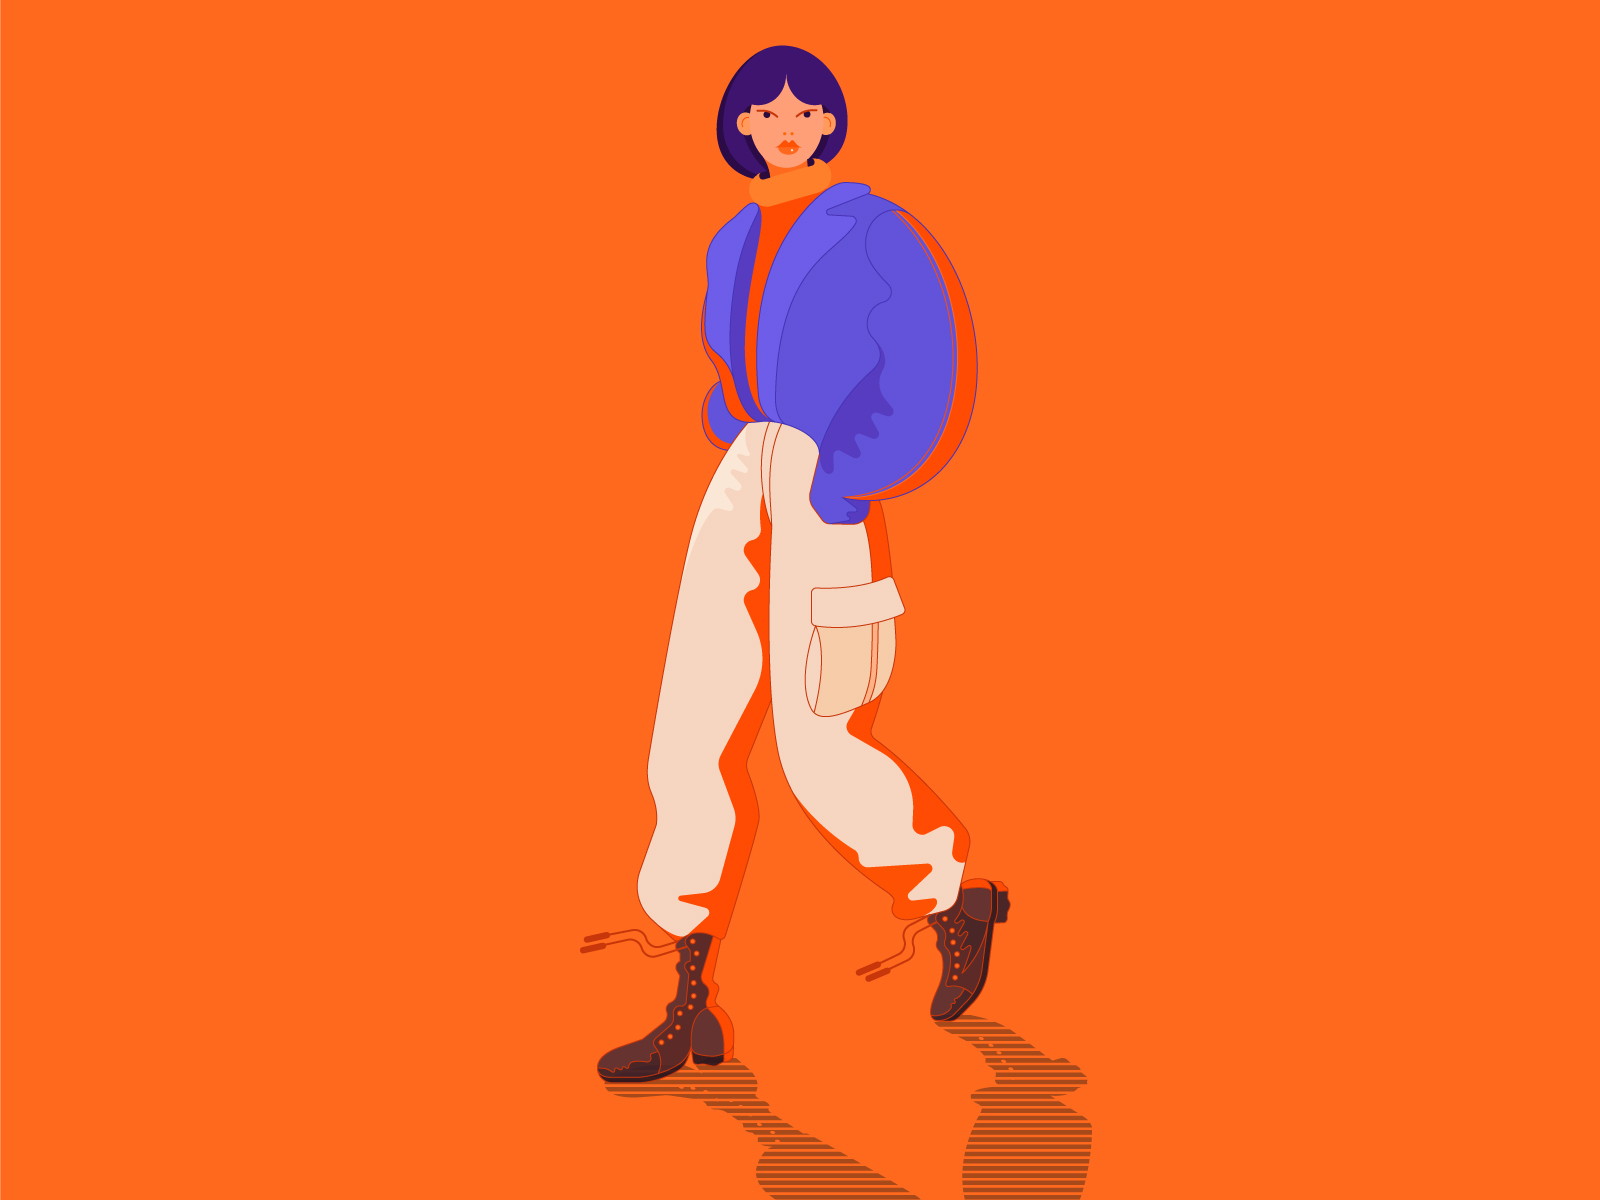 A cool girl by Lonyu on Dribbble